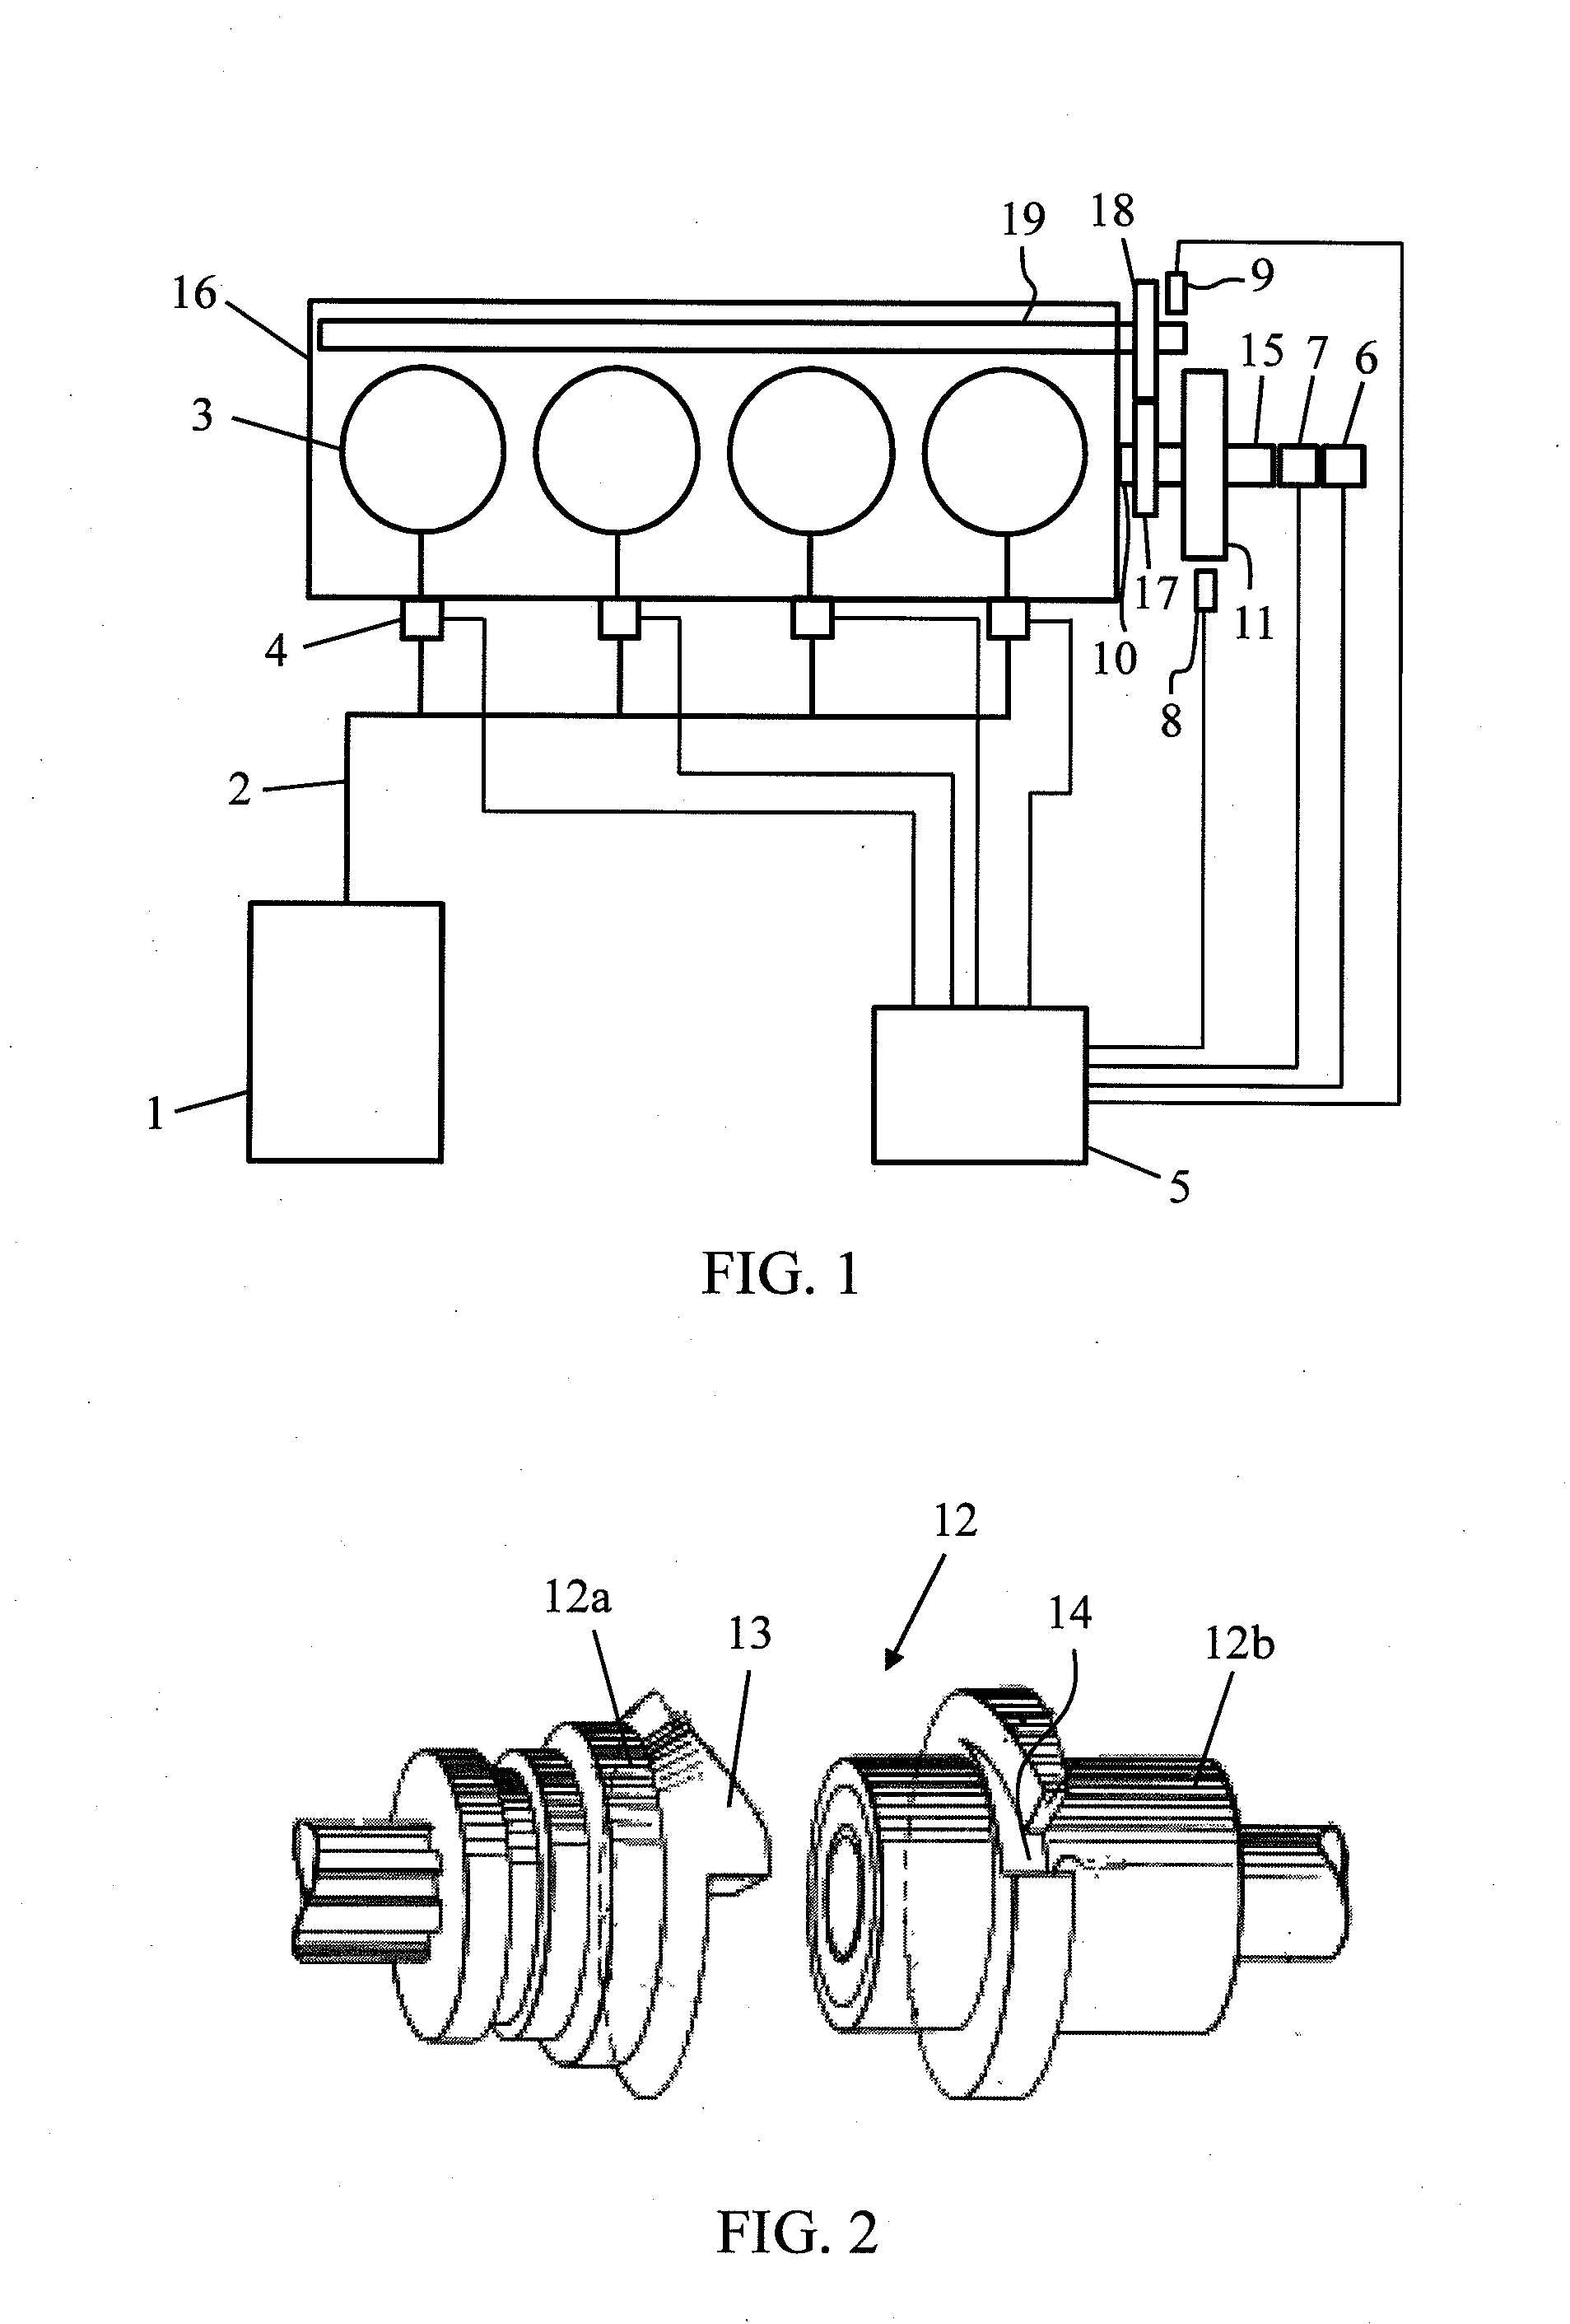 Starting of an internal combustine engine